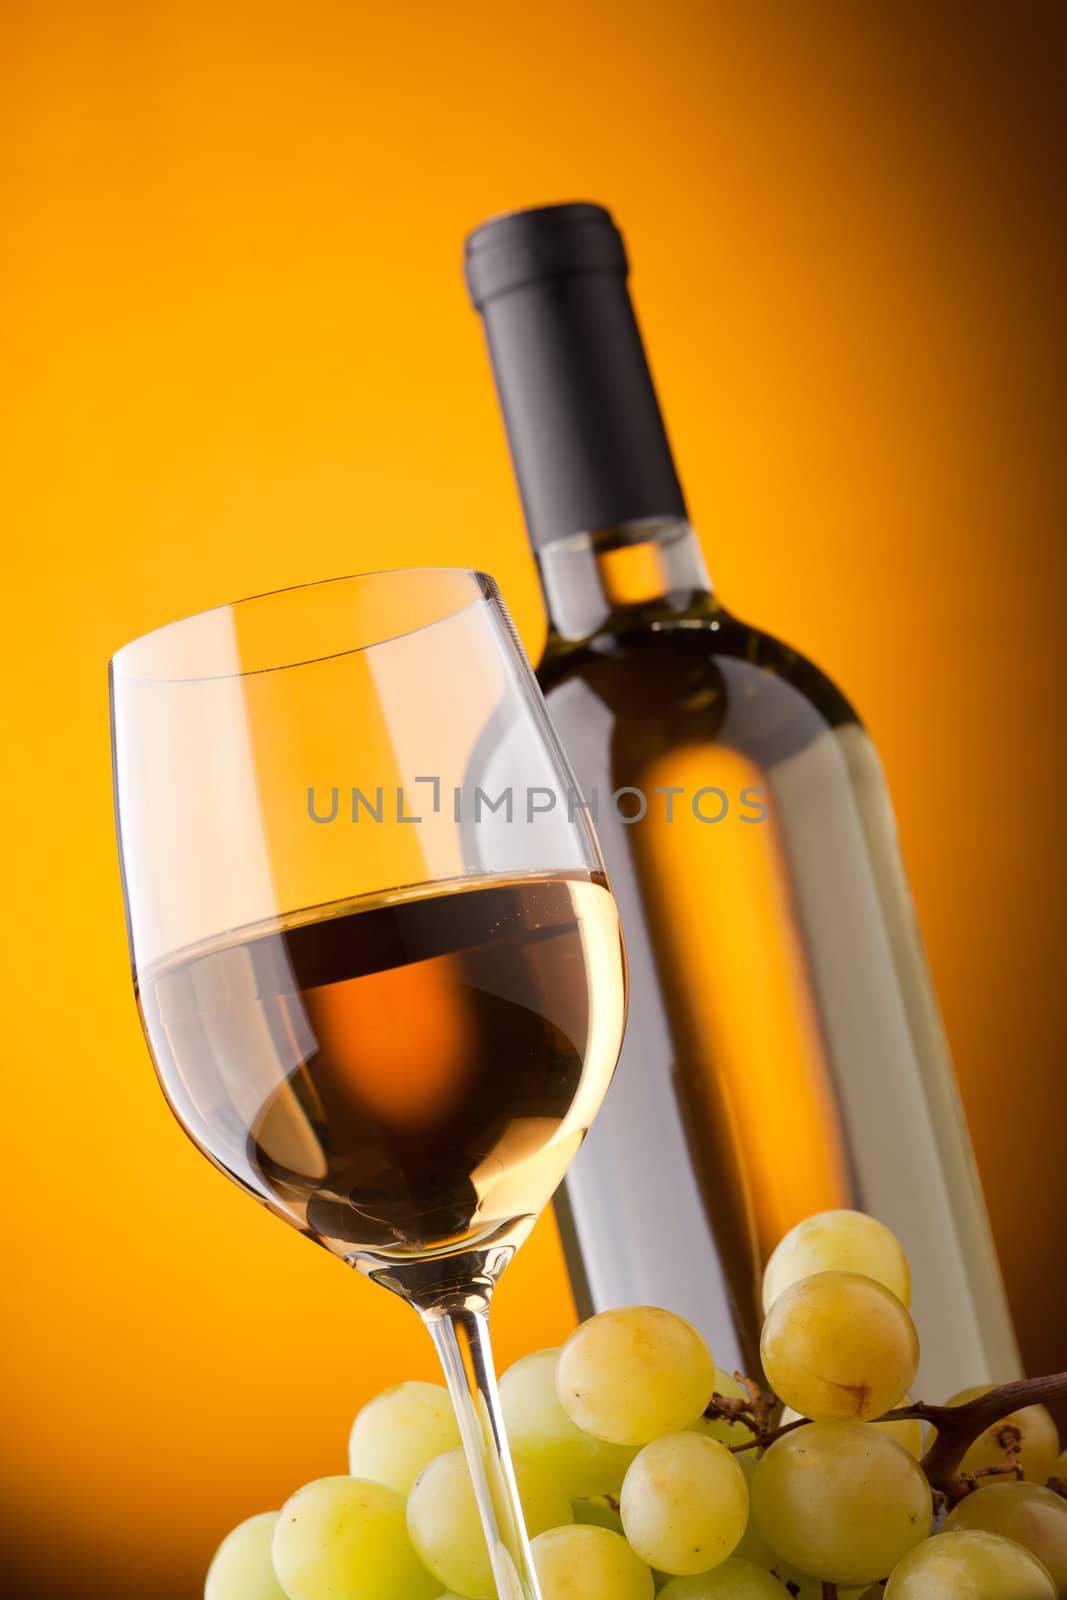 Bottom view of a glass of white wine bottle and grapes on a yellow background